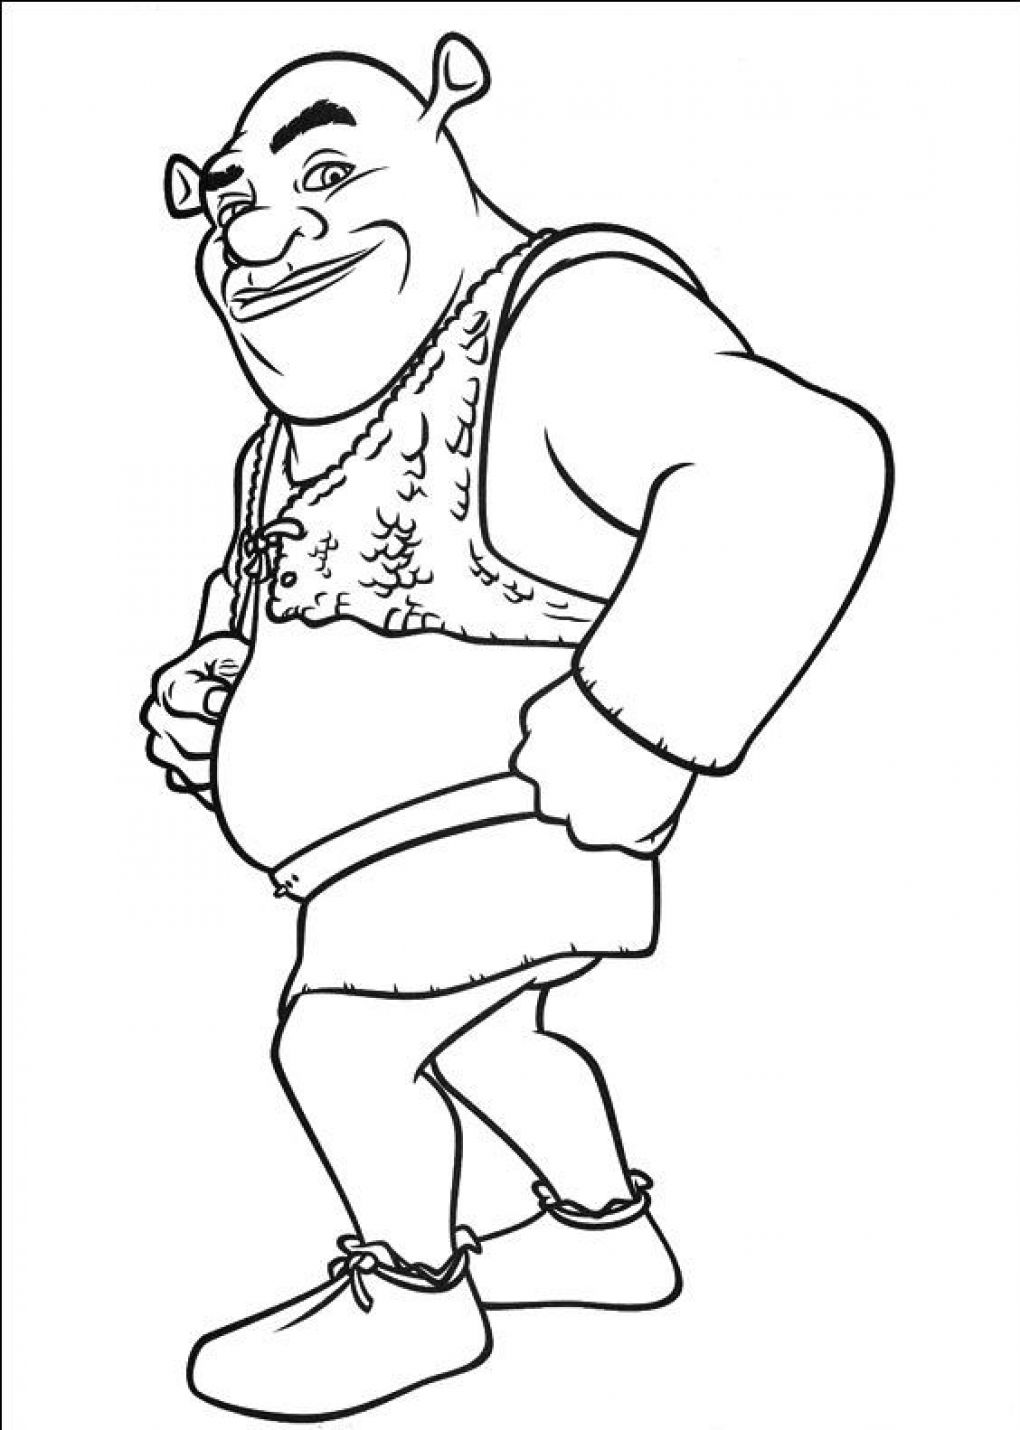 Download #33 DIY Shrek Costume & Birthday Party ideas and Shrek Coloring pages - Page 3 of 3